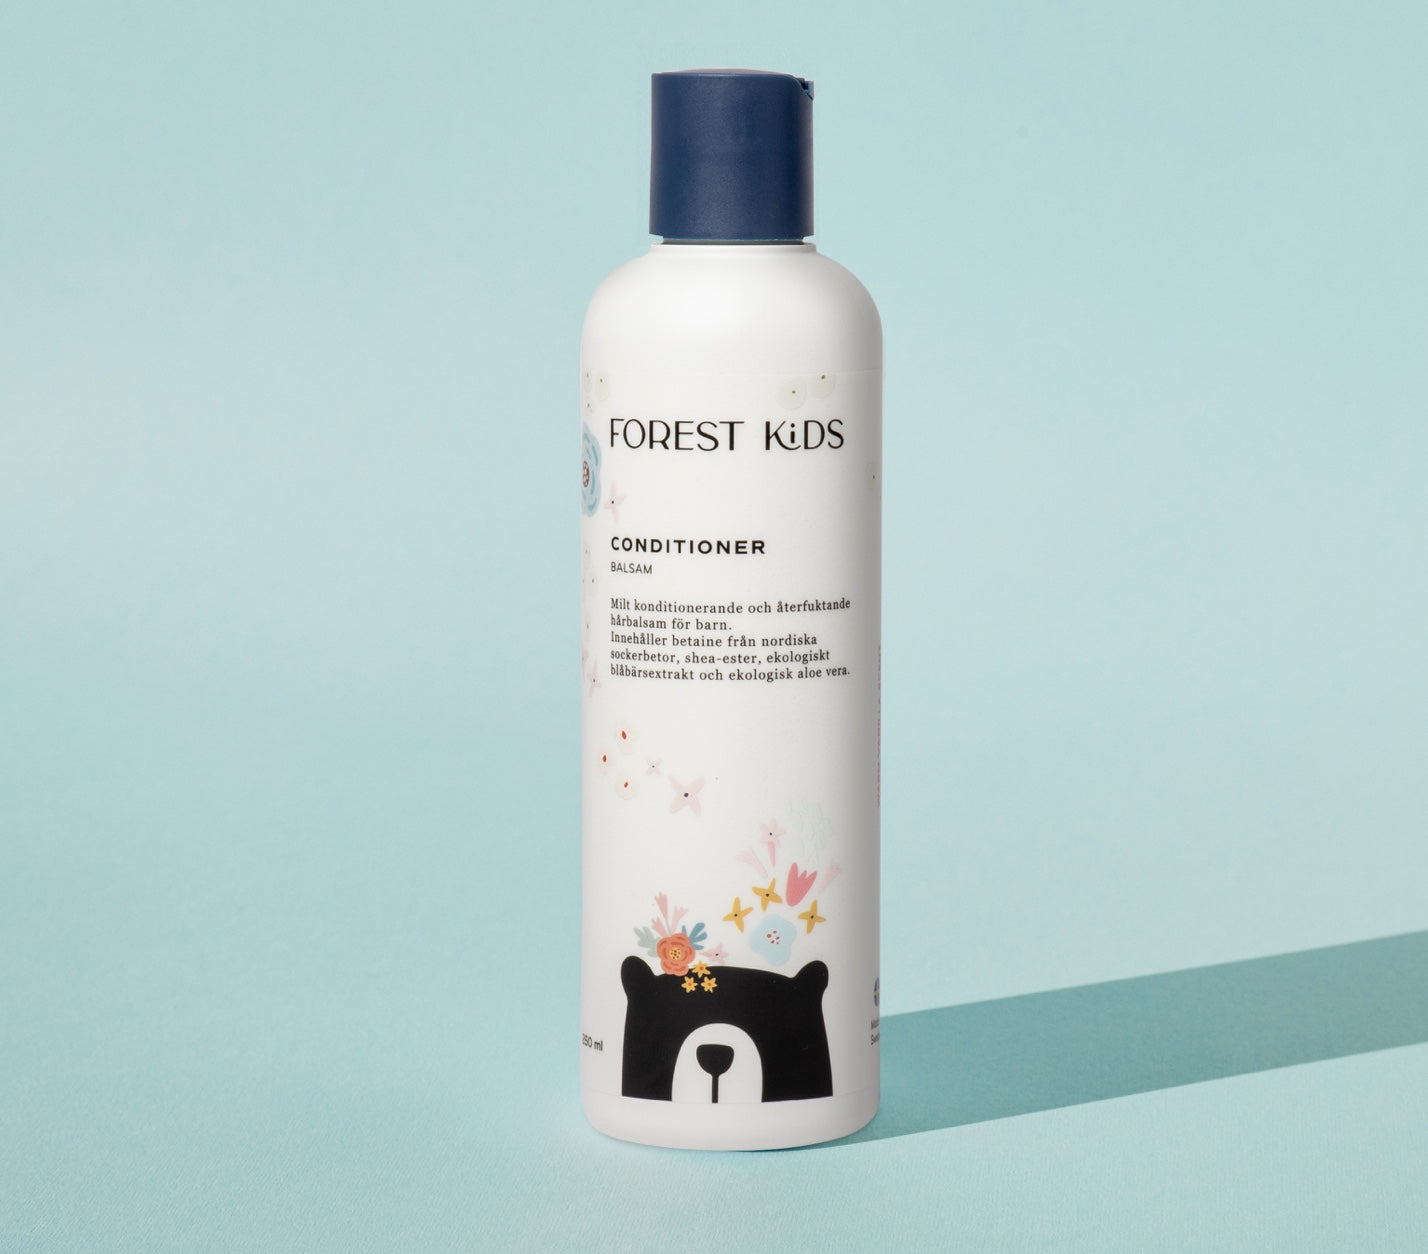 The Forest Kids hair conditioner offers gentle conditioning and moisture to children's hair, leaving it silky smooth and easy to comb